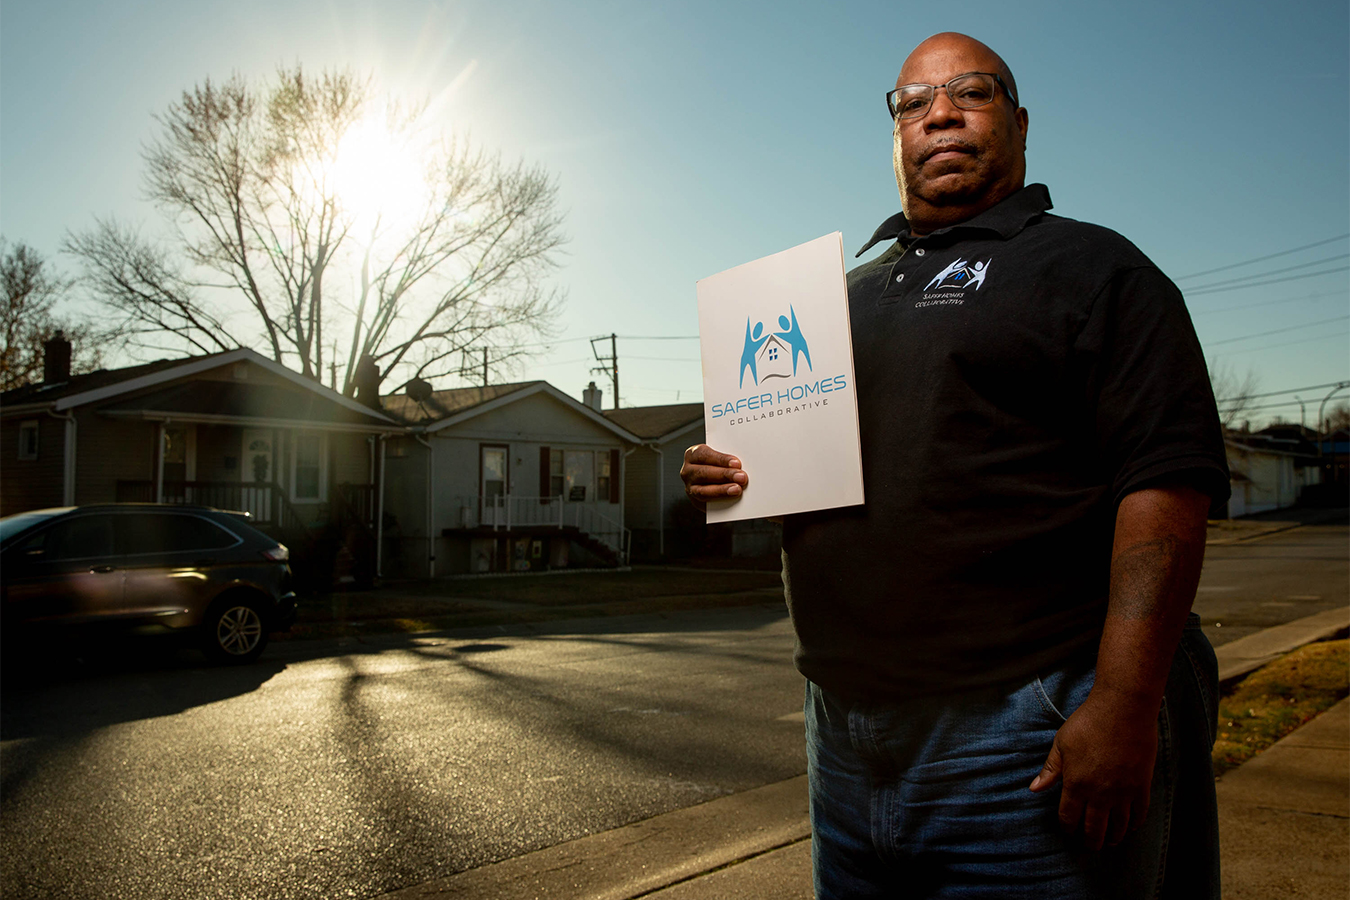 Bill Mays stands for a portrait on the sidewalk, holding a folder with the logo and name of his employer, Safer Homes Collaborative. Warm sunlight hits from the left side, leaving long shadows.